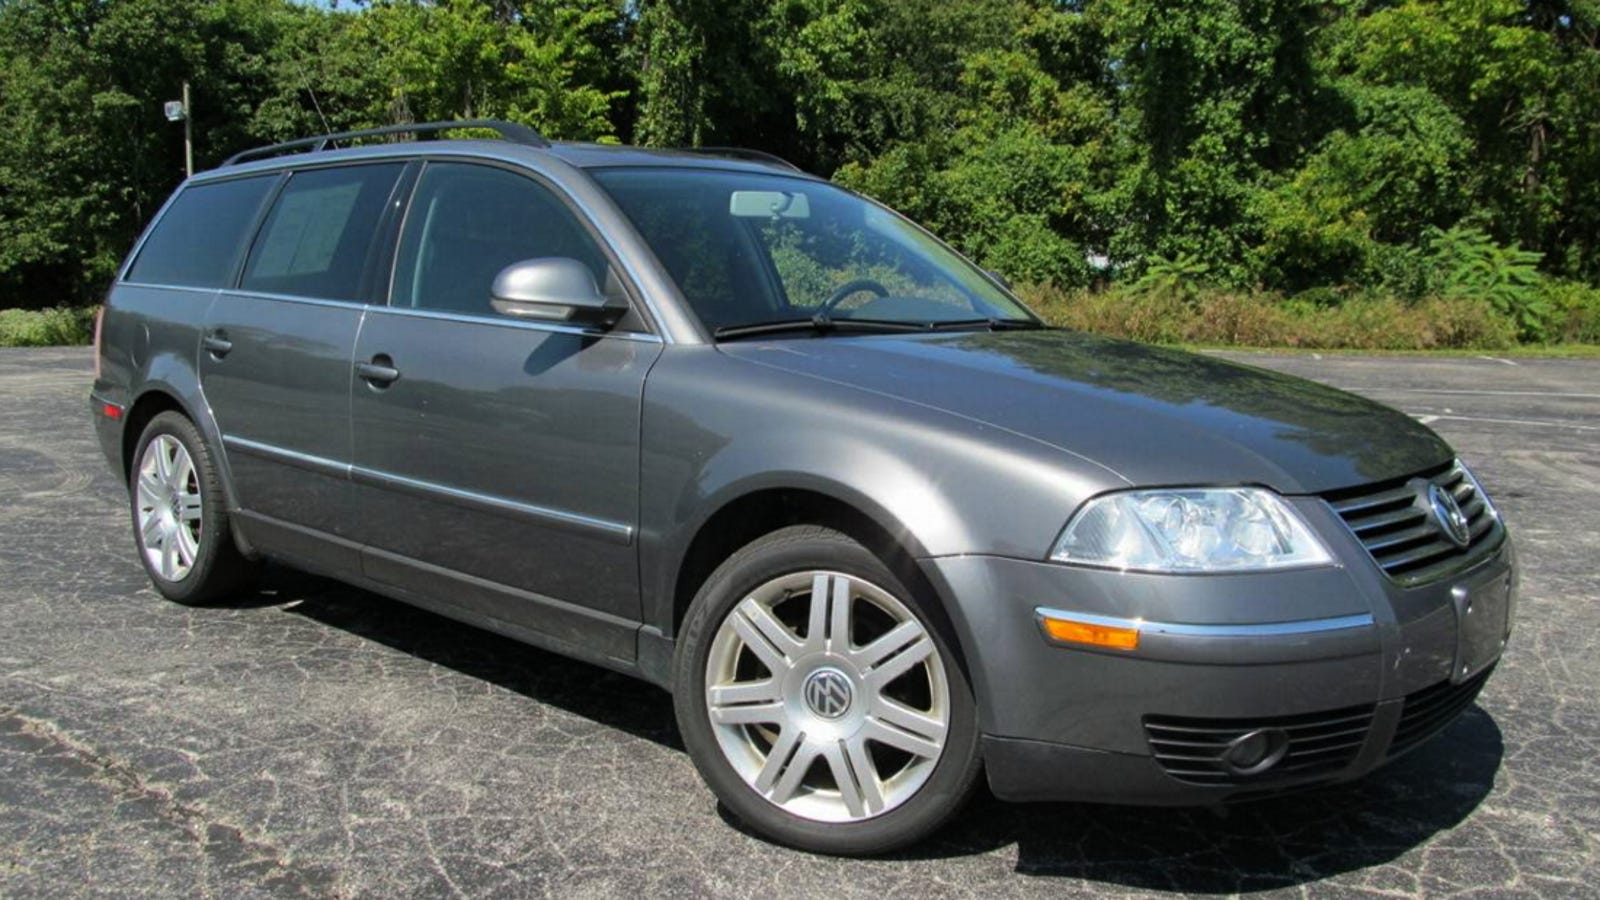 For 5,999, Could This 2005 VW Passat TDI Be Passable?